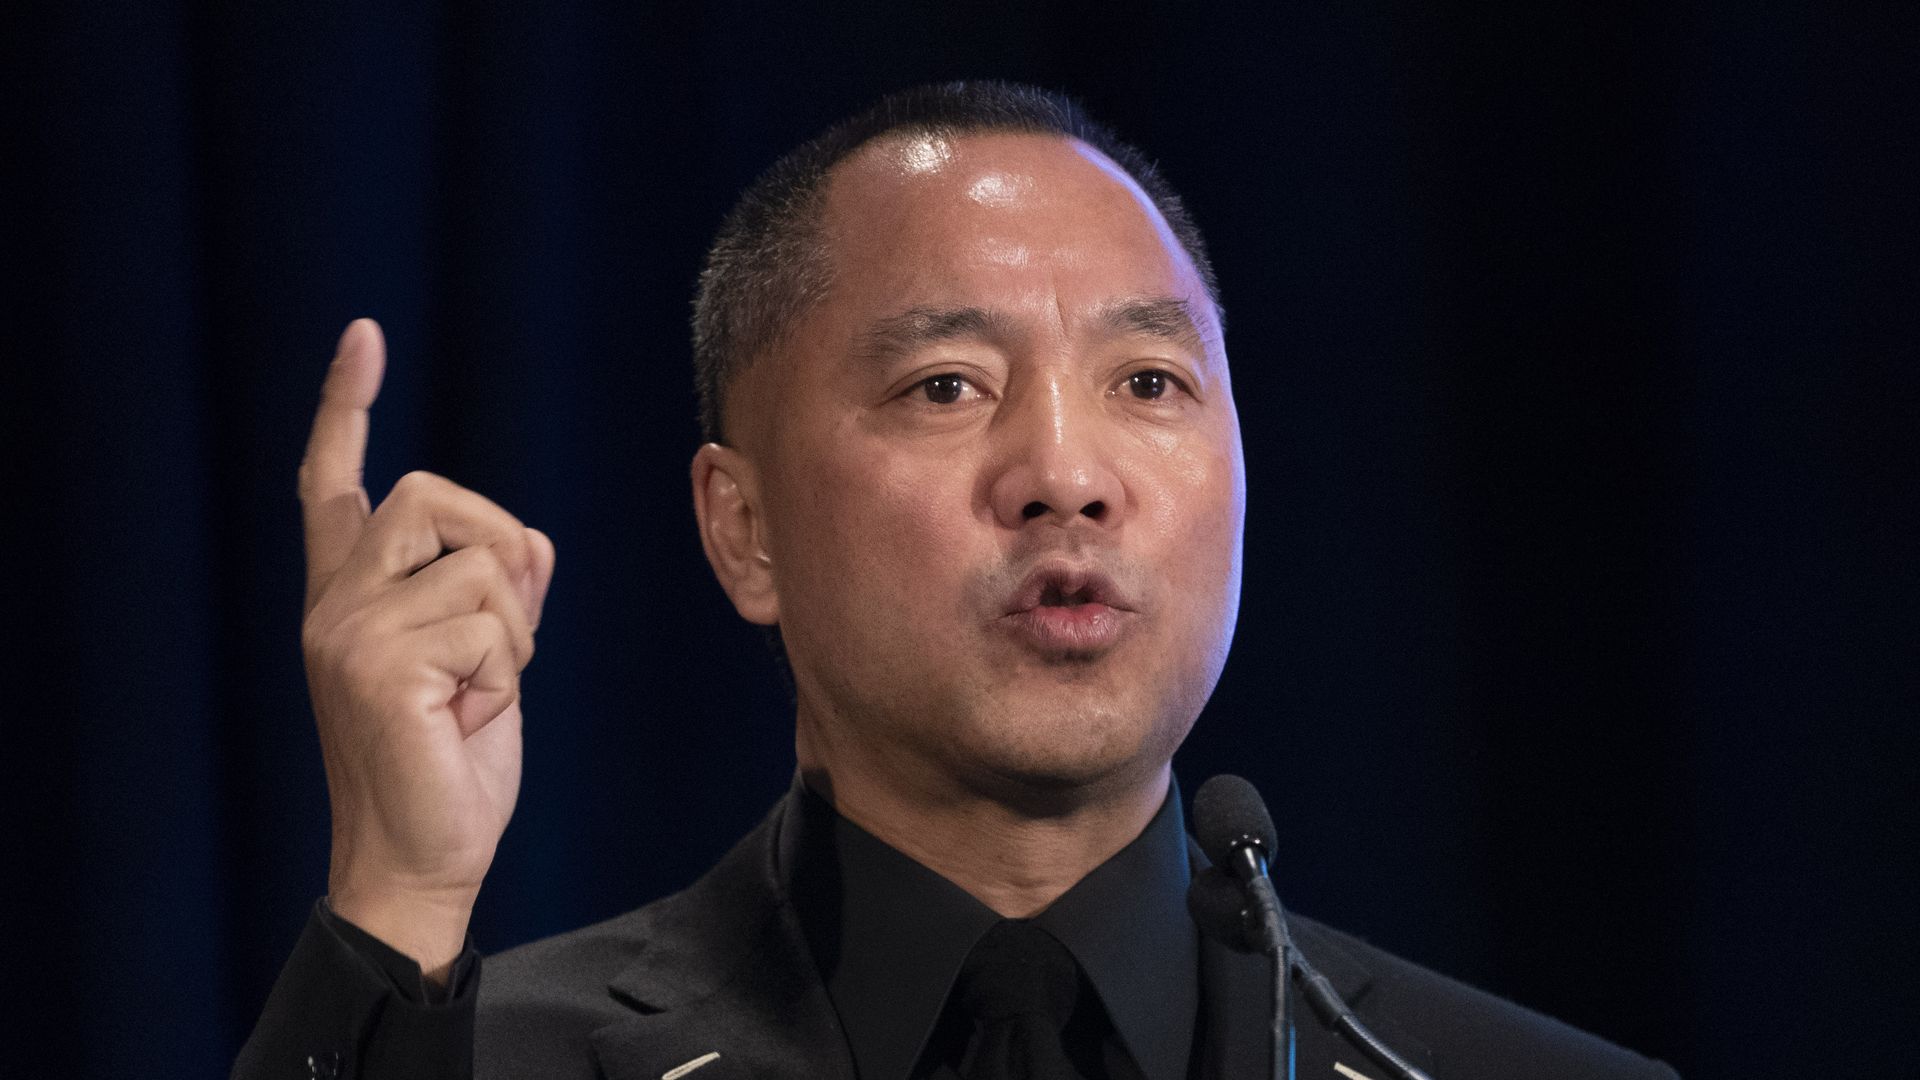 Guo Wengui holds a news conference on November 20, 2018 